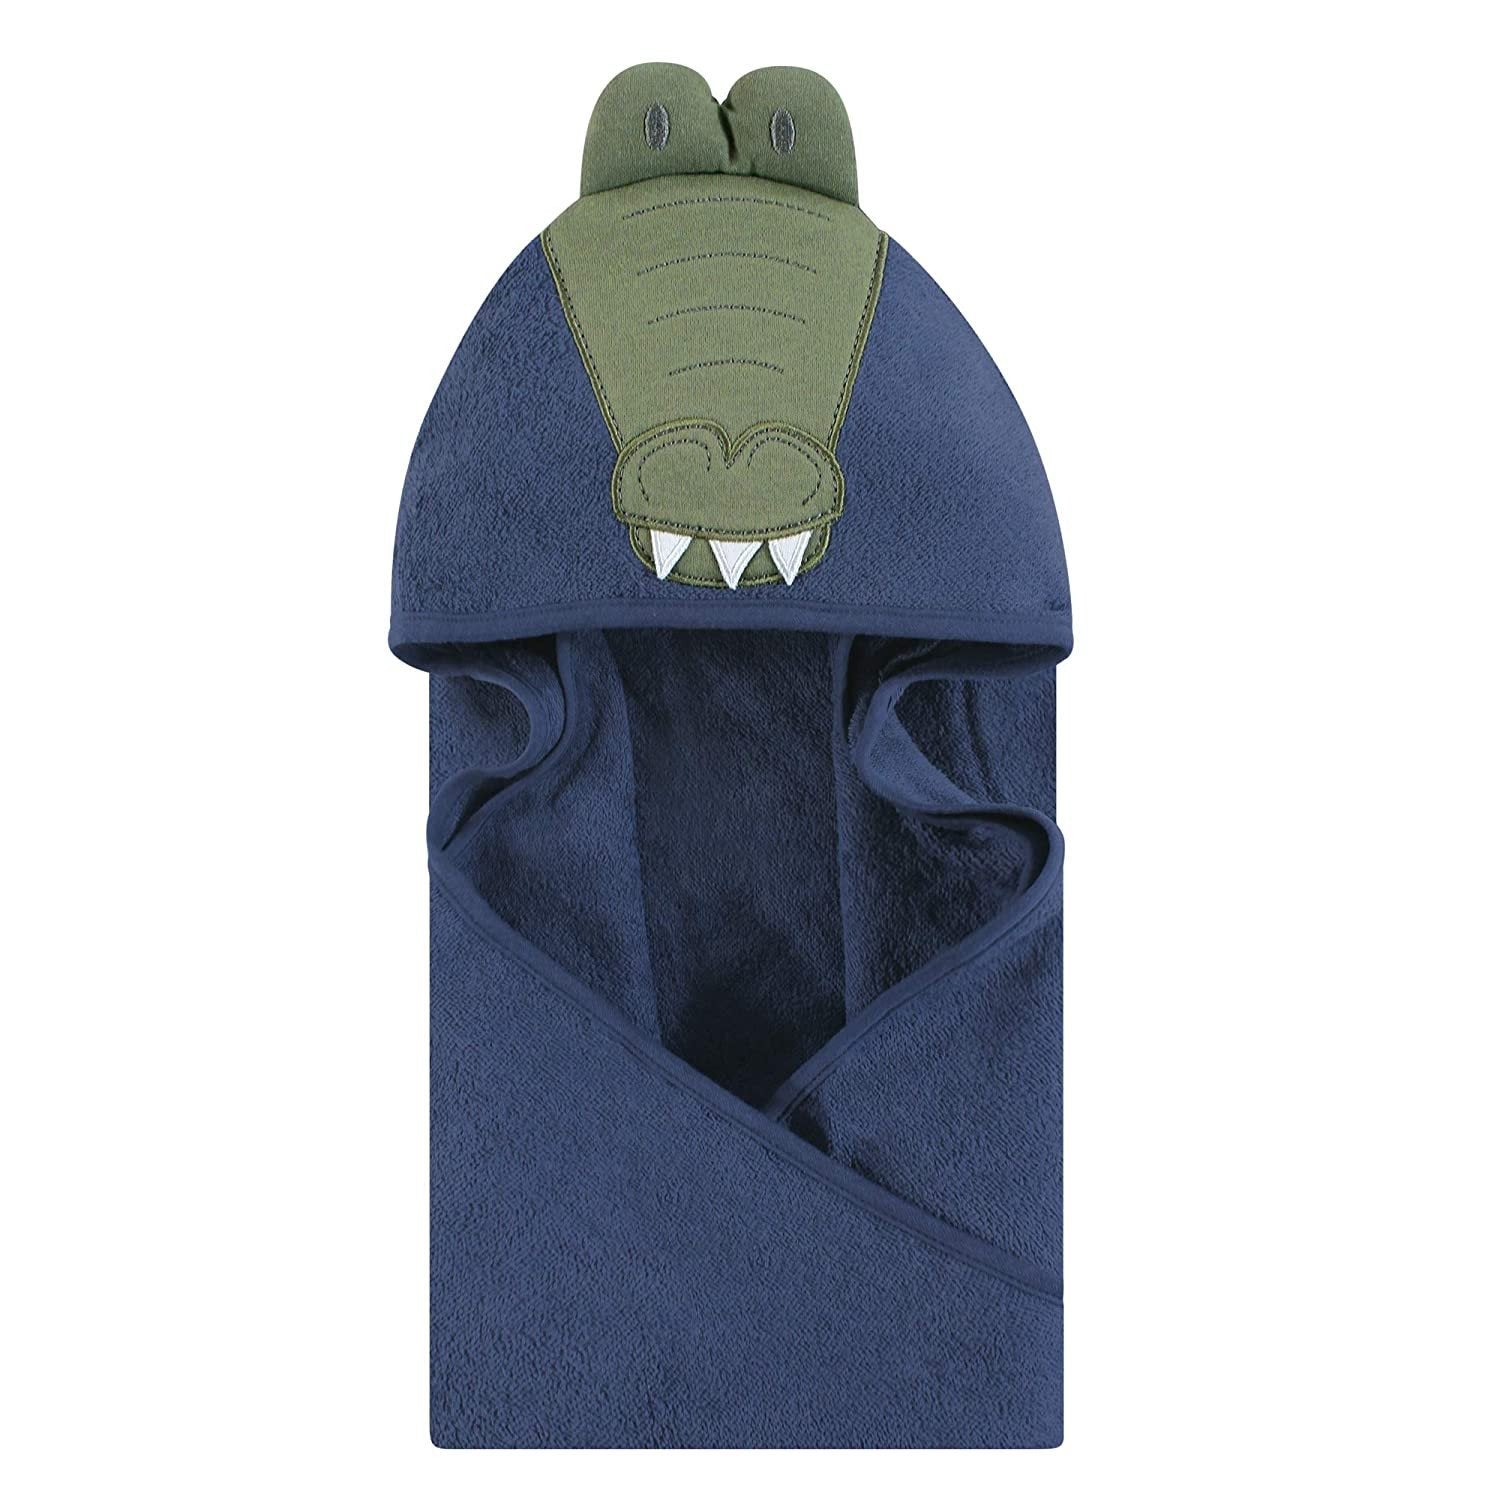 Hudson Baby Cotton Animal Face Hooded Towel.